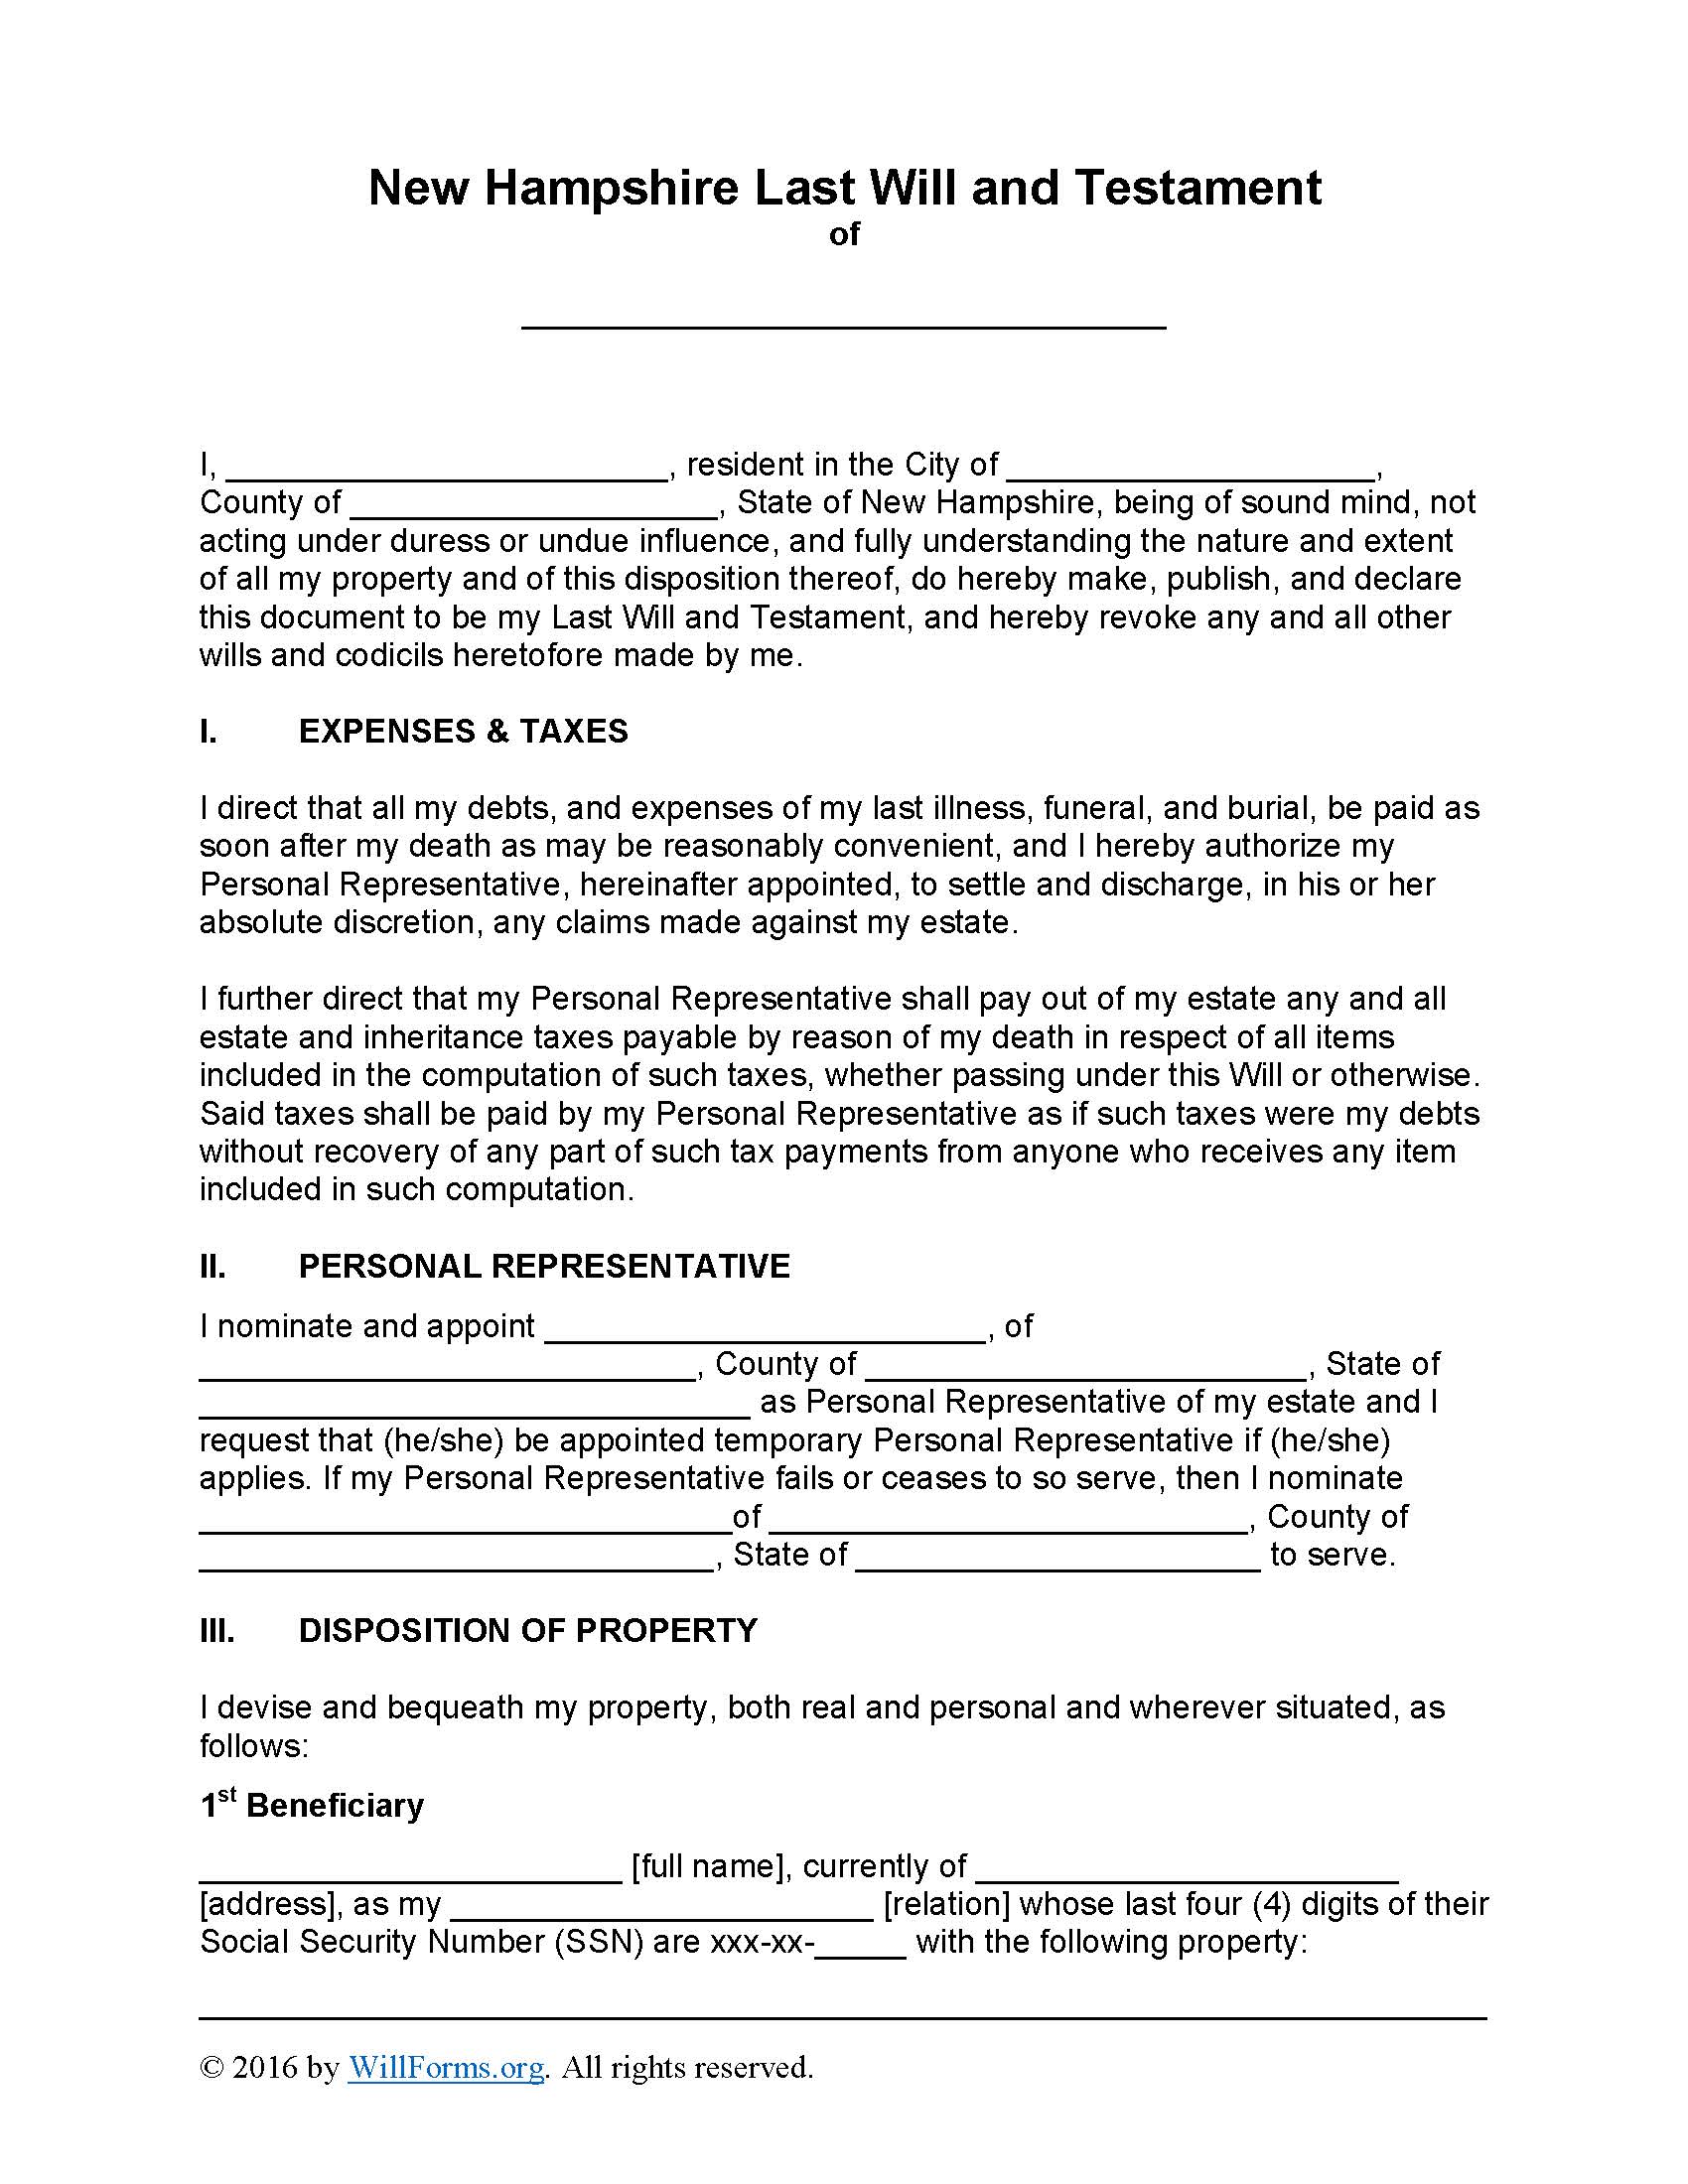 New Hampshire Last Will and Testament Form